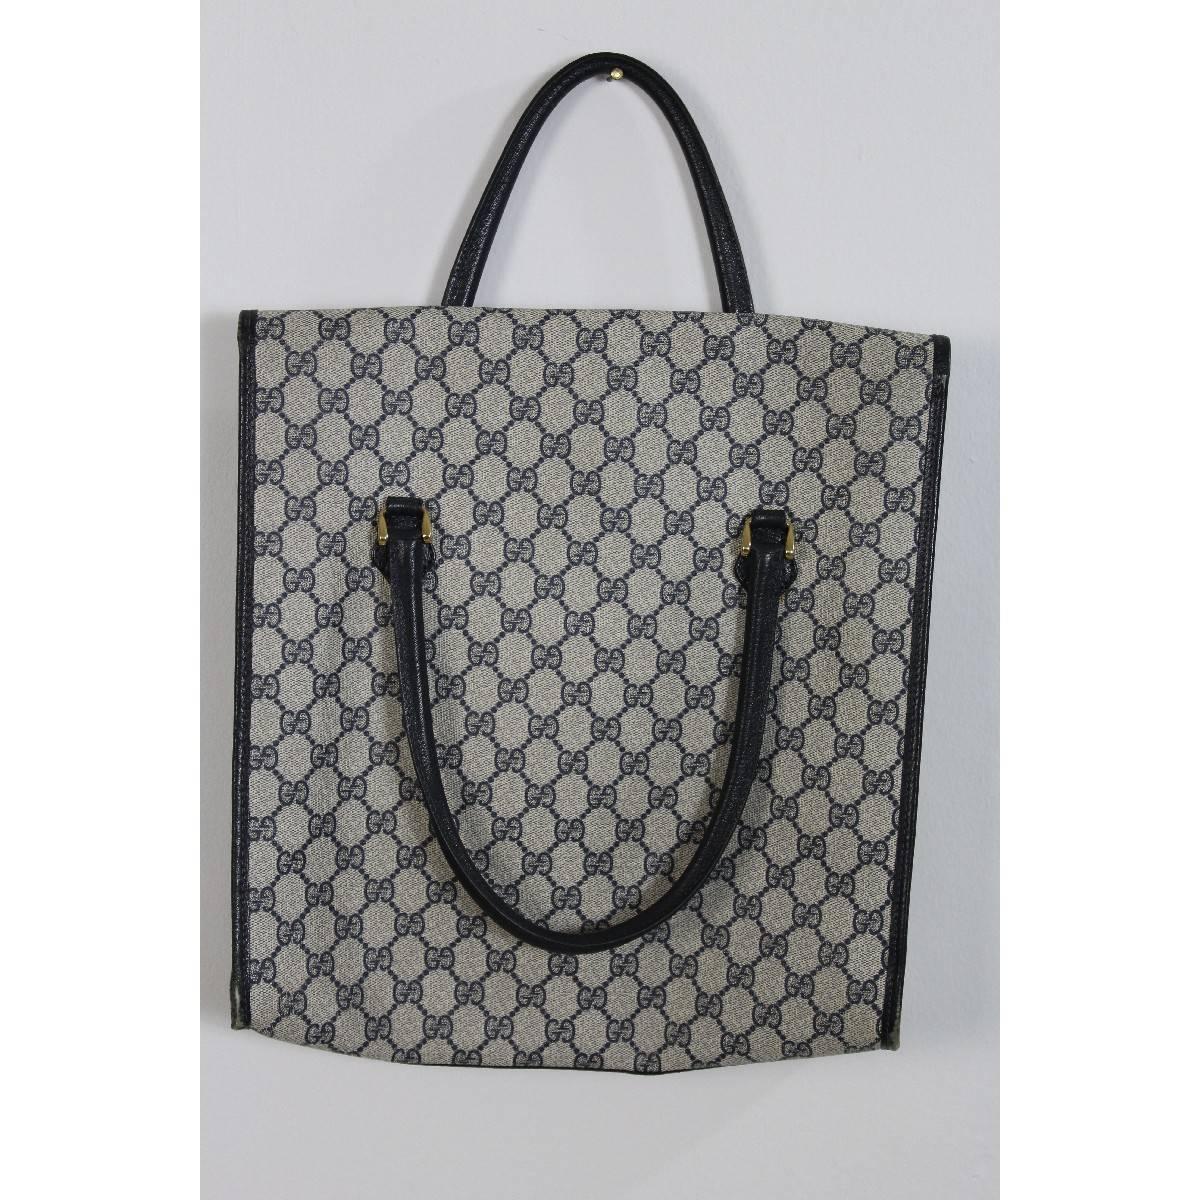 Gucci vintage handbag monogram blue and white, leather and canvas texture, gold logo. Code 02.4139.58.
Good condition 

Measure:
height: 37 cm
length: 33.5 cm
width: 7 cm

Color: blue and white

Condition: good